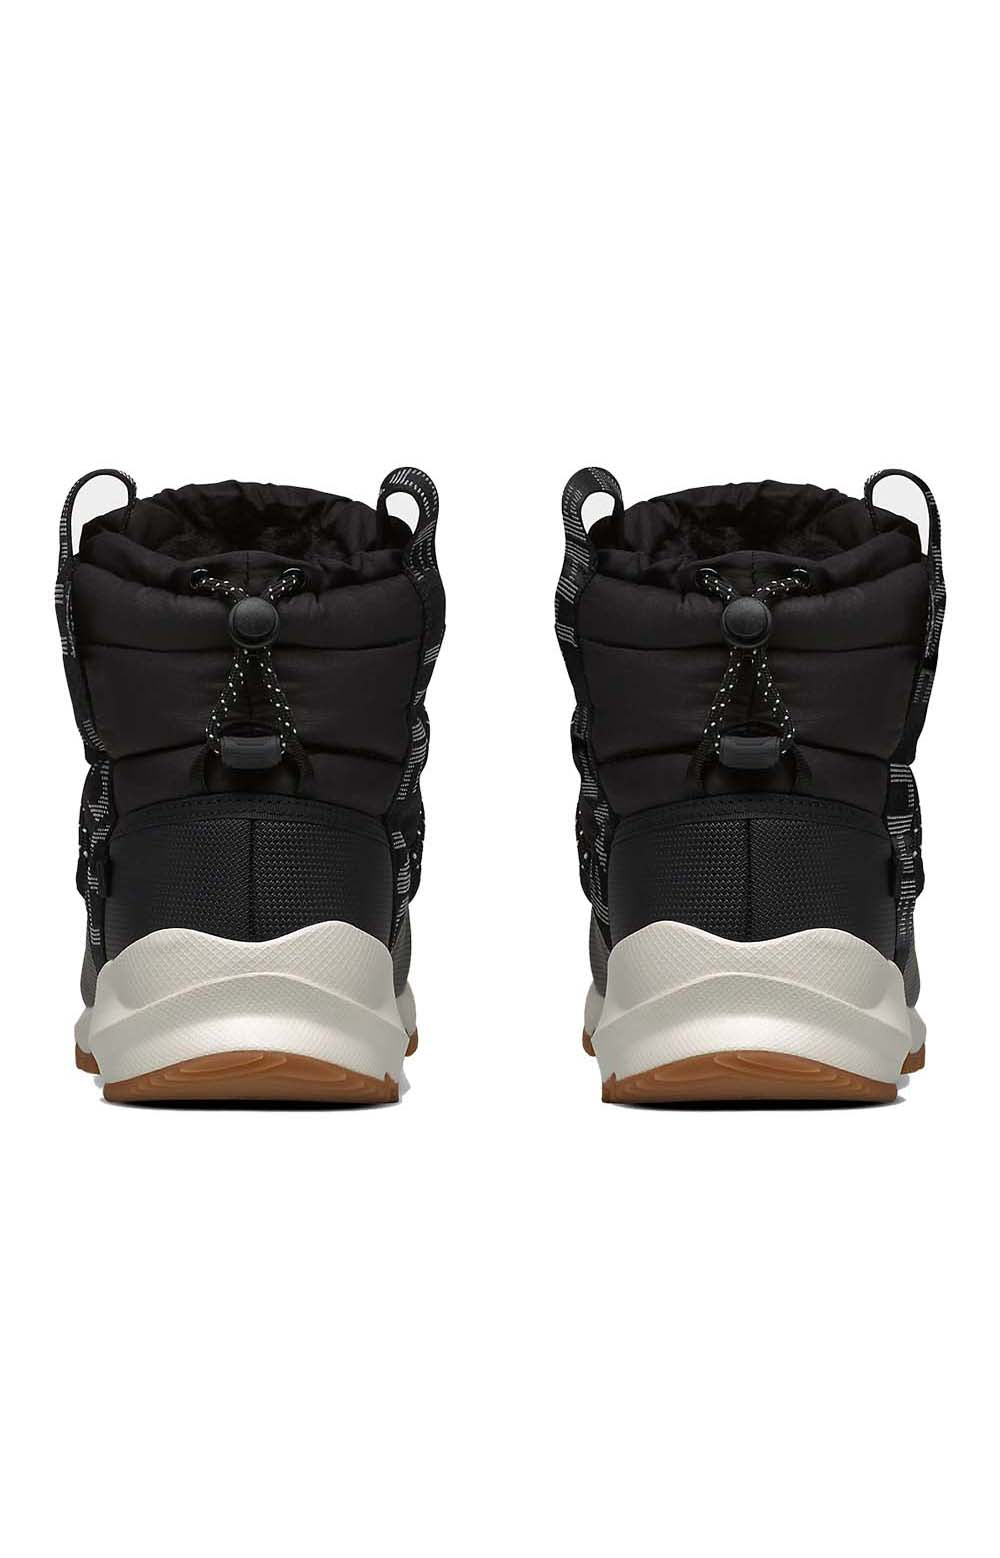 (LWDR0G) ThermoBall Lace Up Waterproof Boots - TNF Black/ Gardenia White